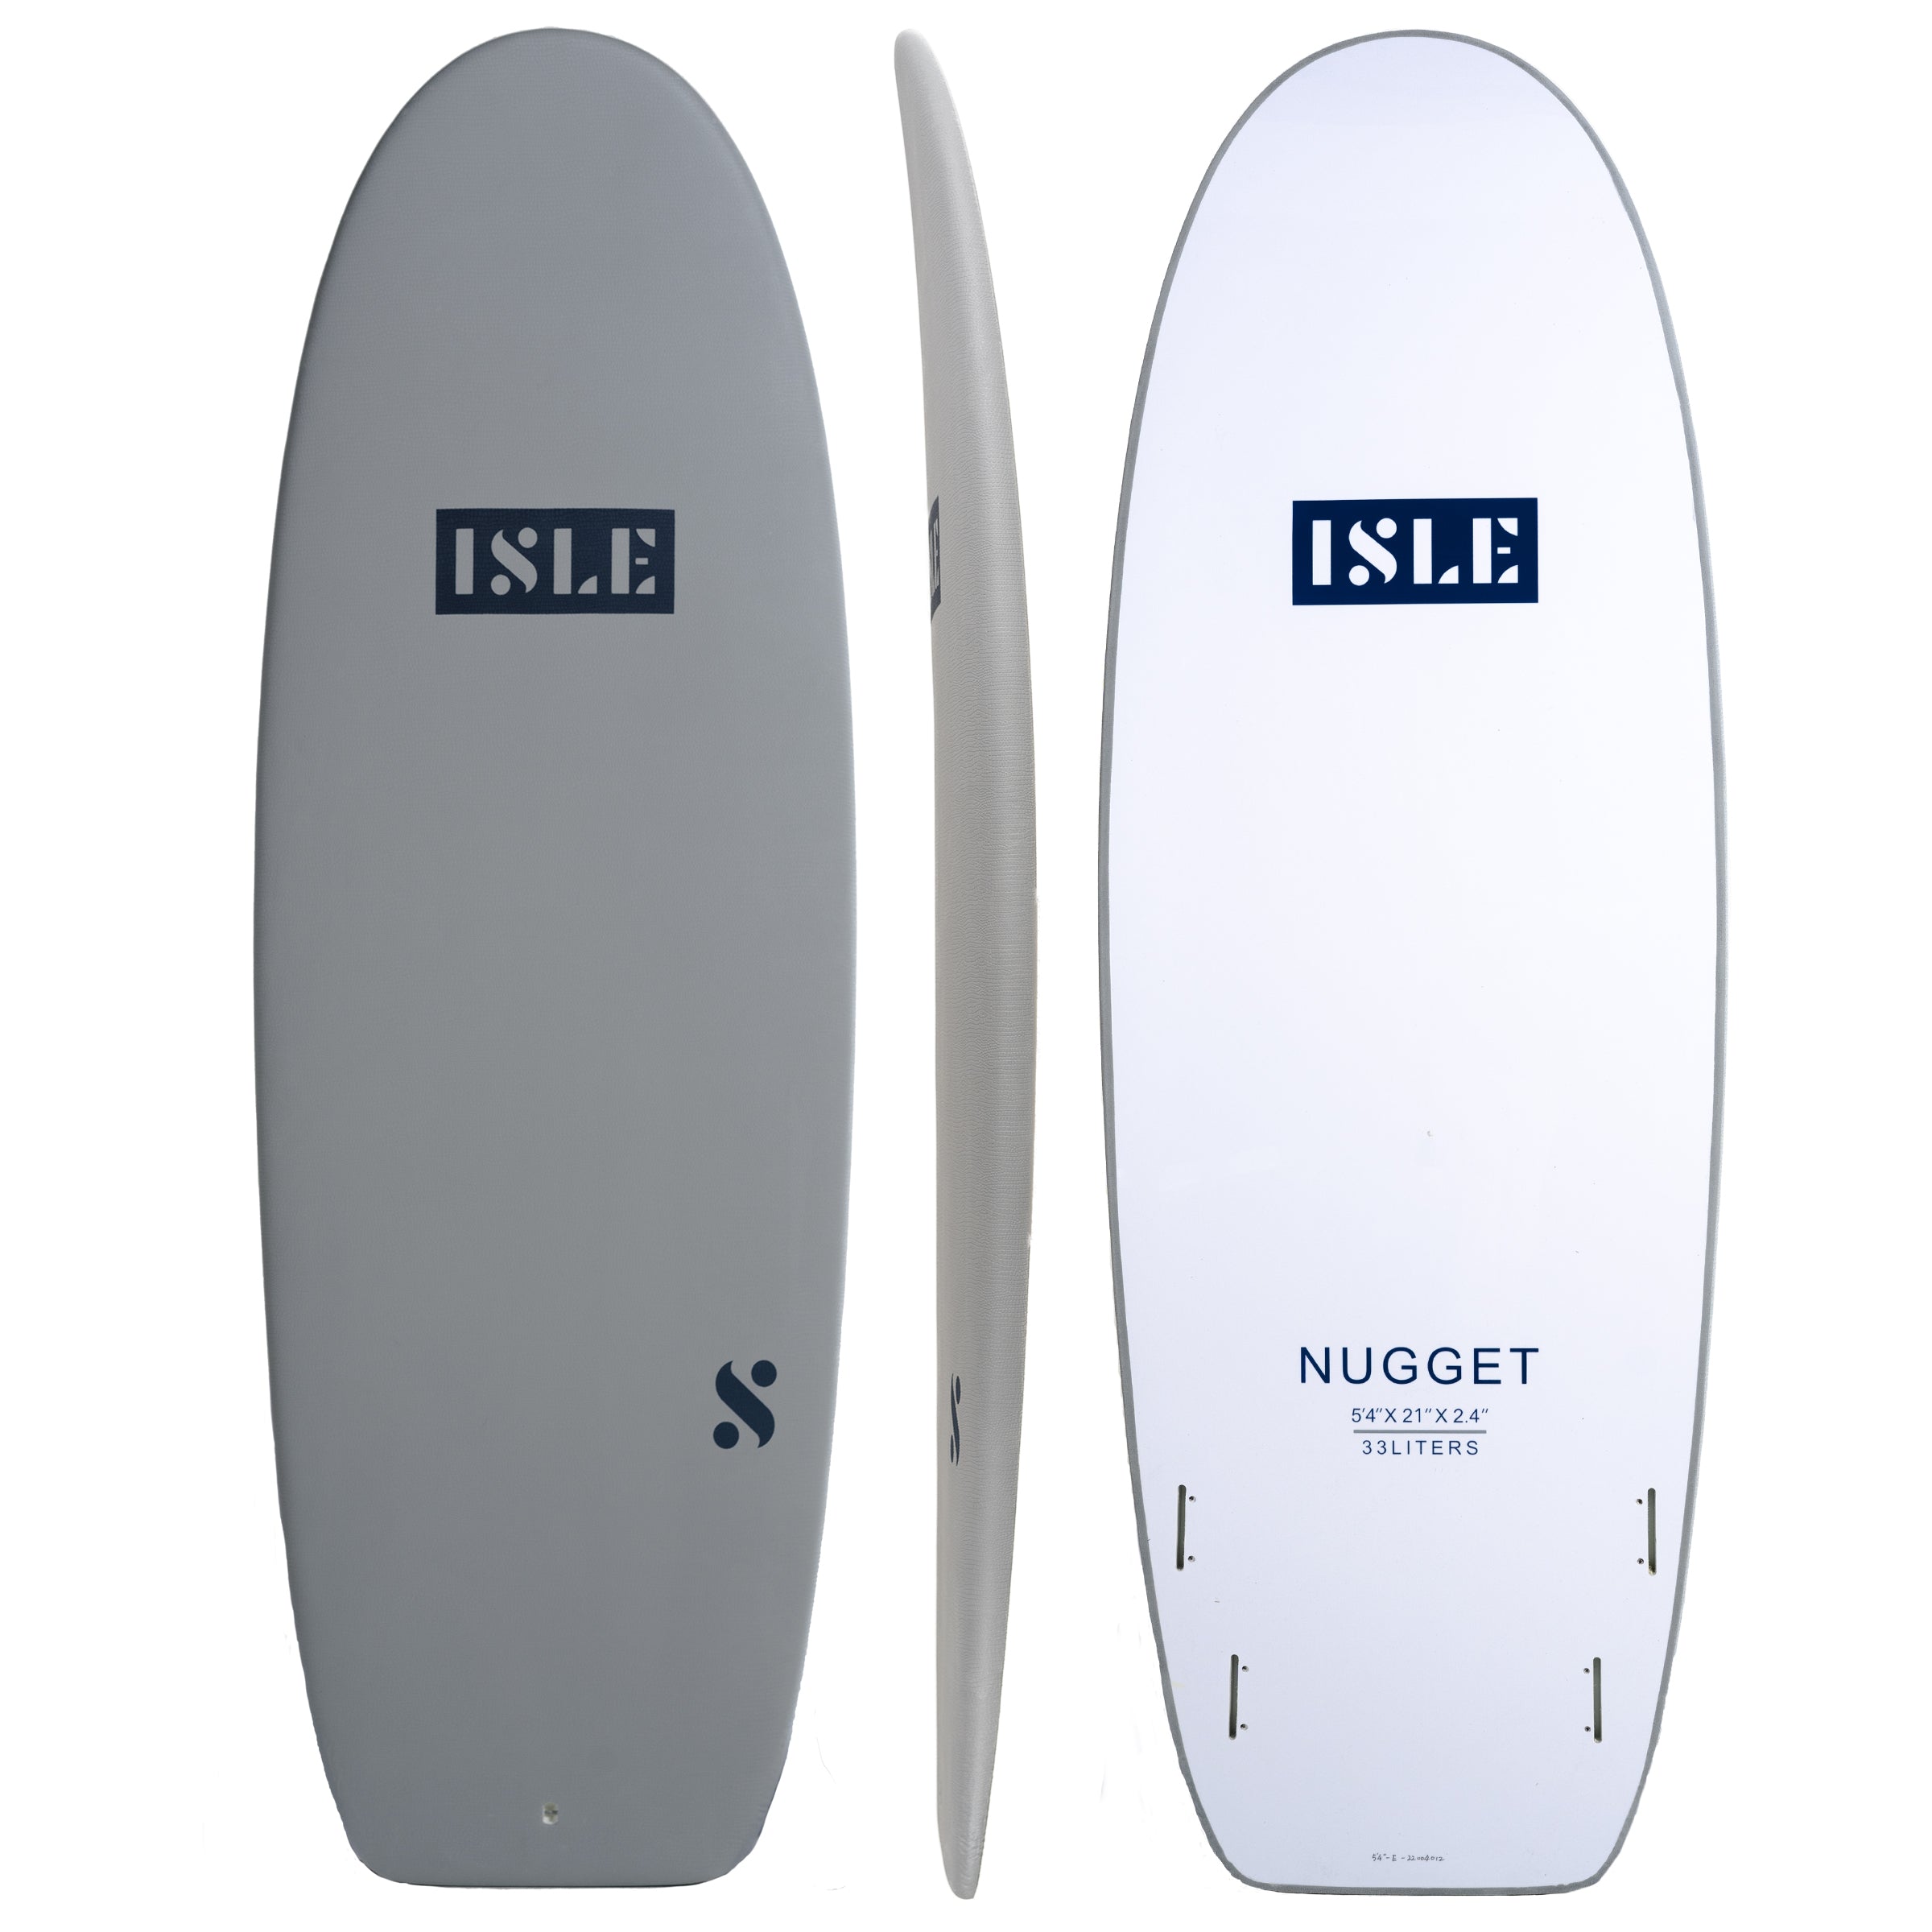 Nugget Soft Top Surfboard in Grey Blue